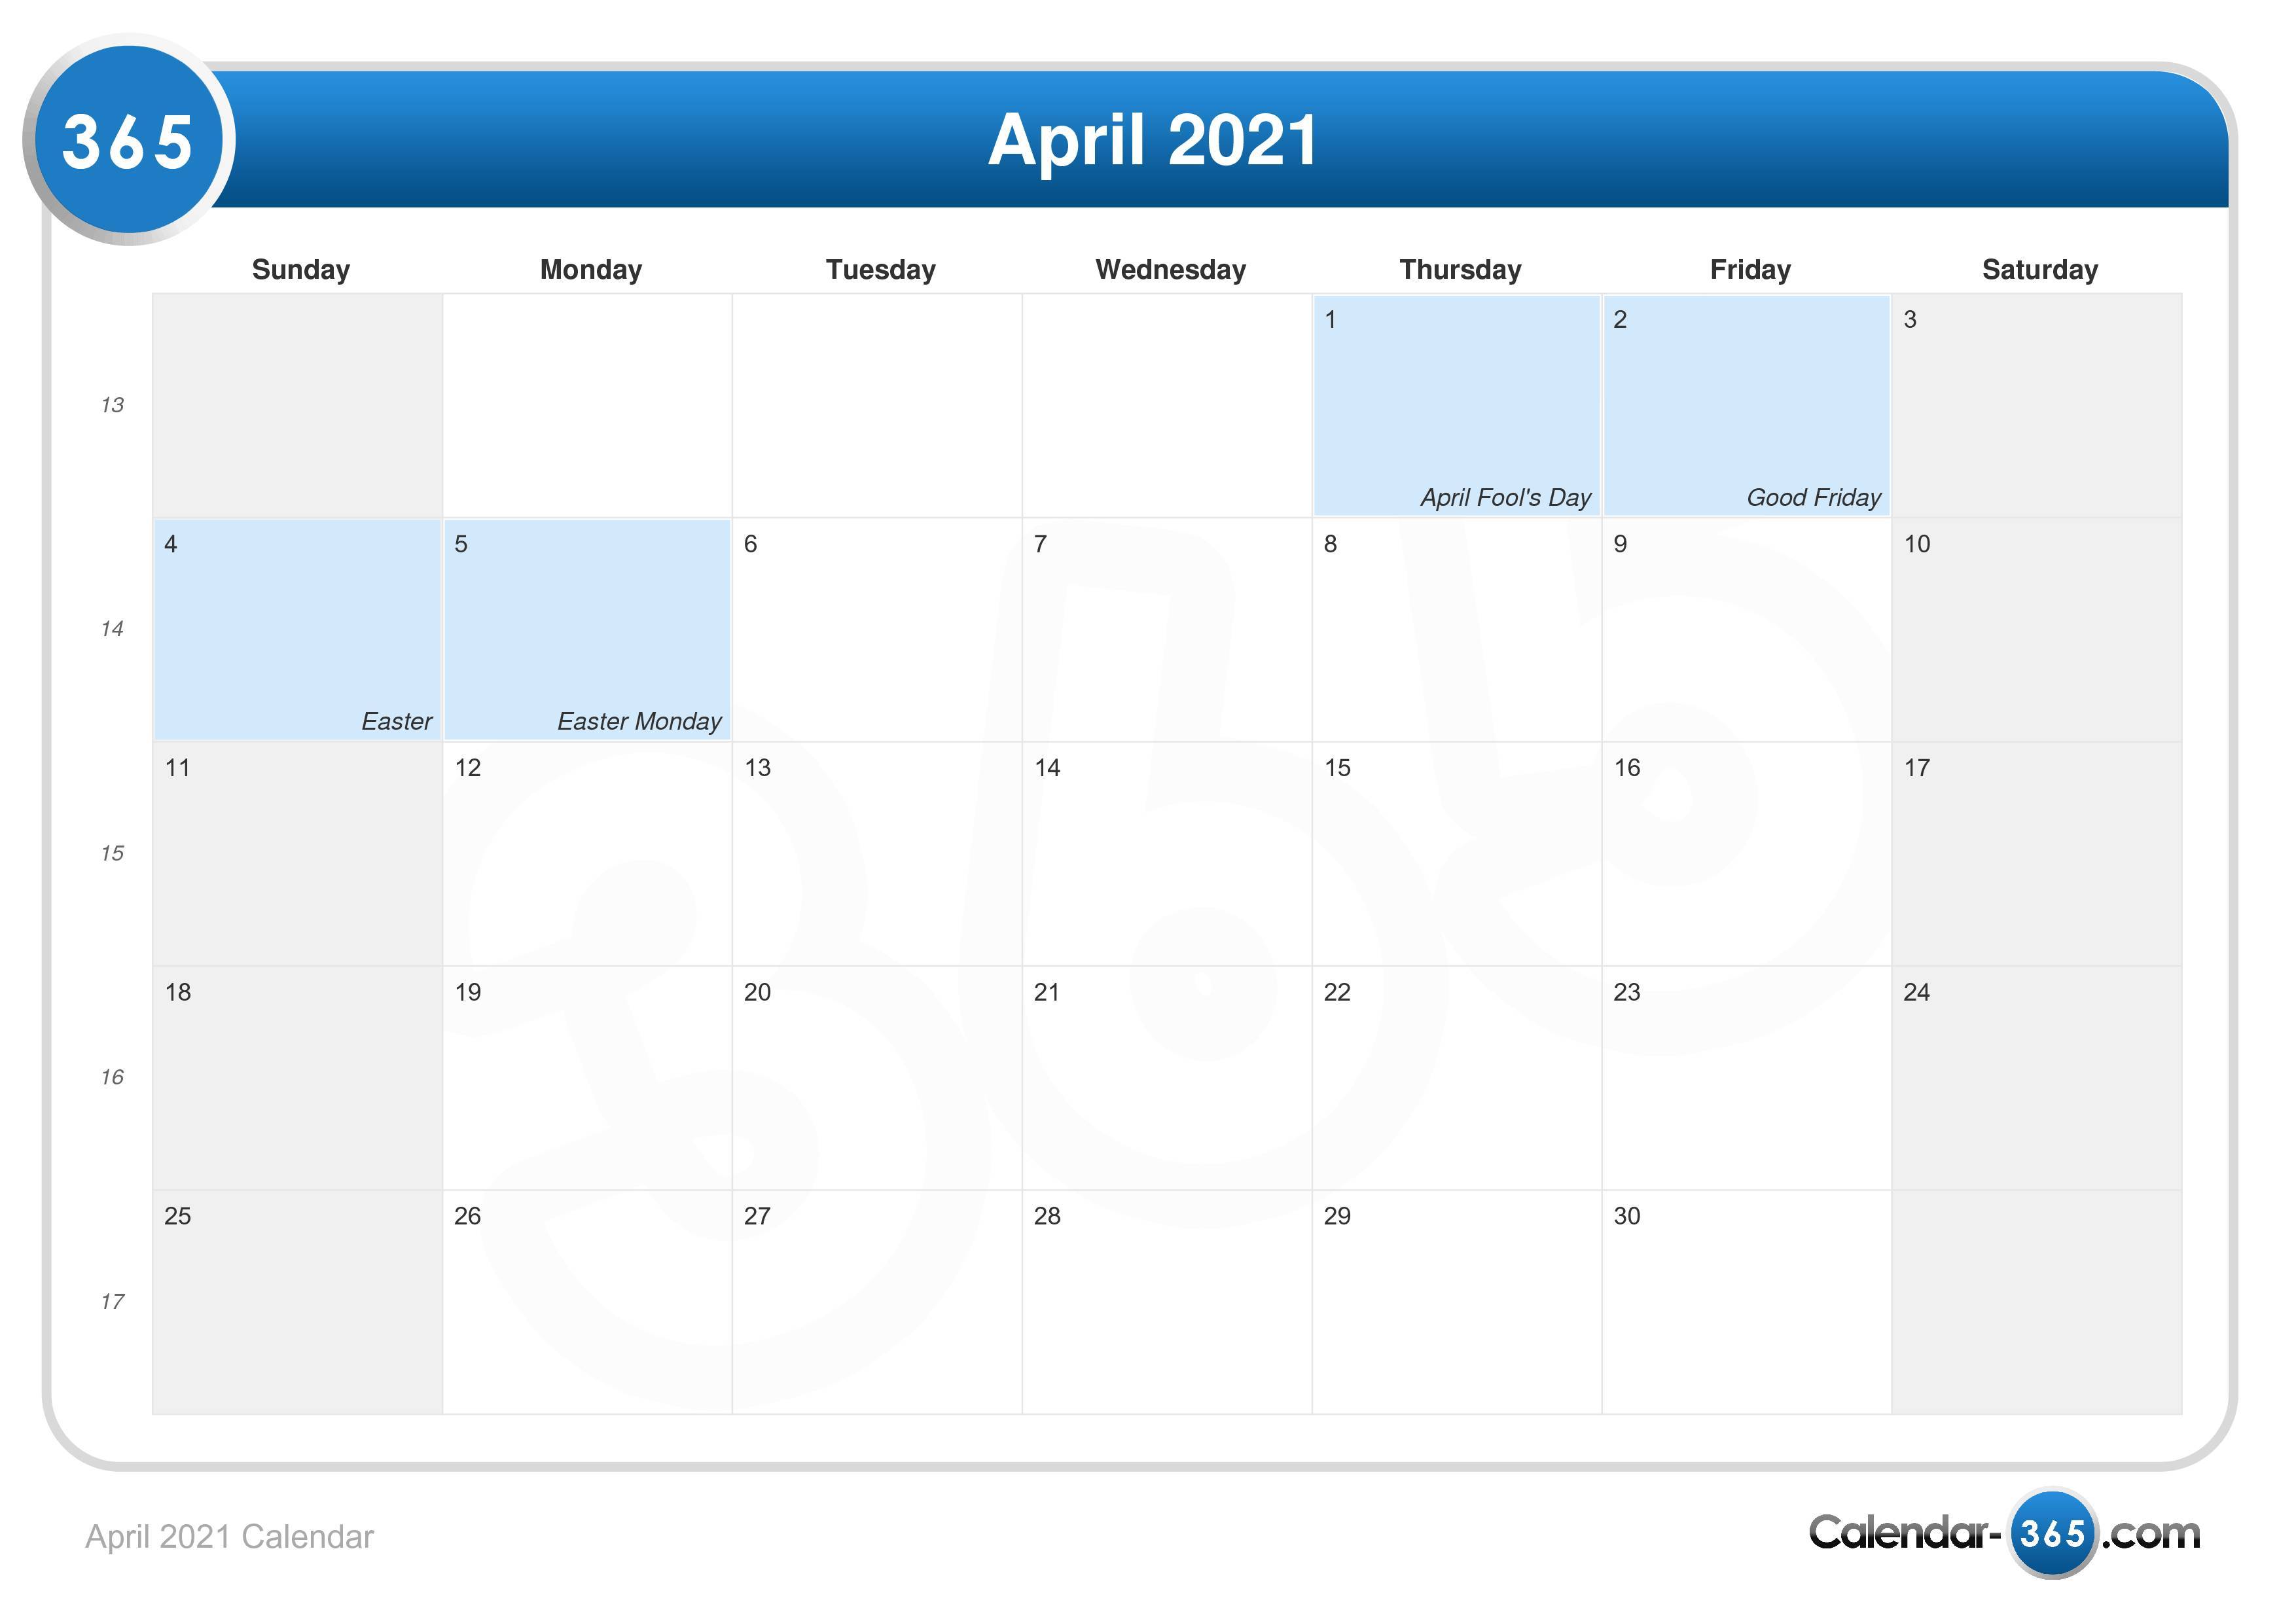 April 2021 Calendar Usa They are free and ready to print, in a4 or